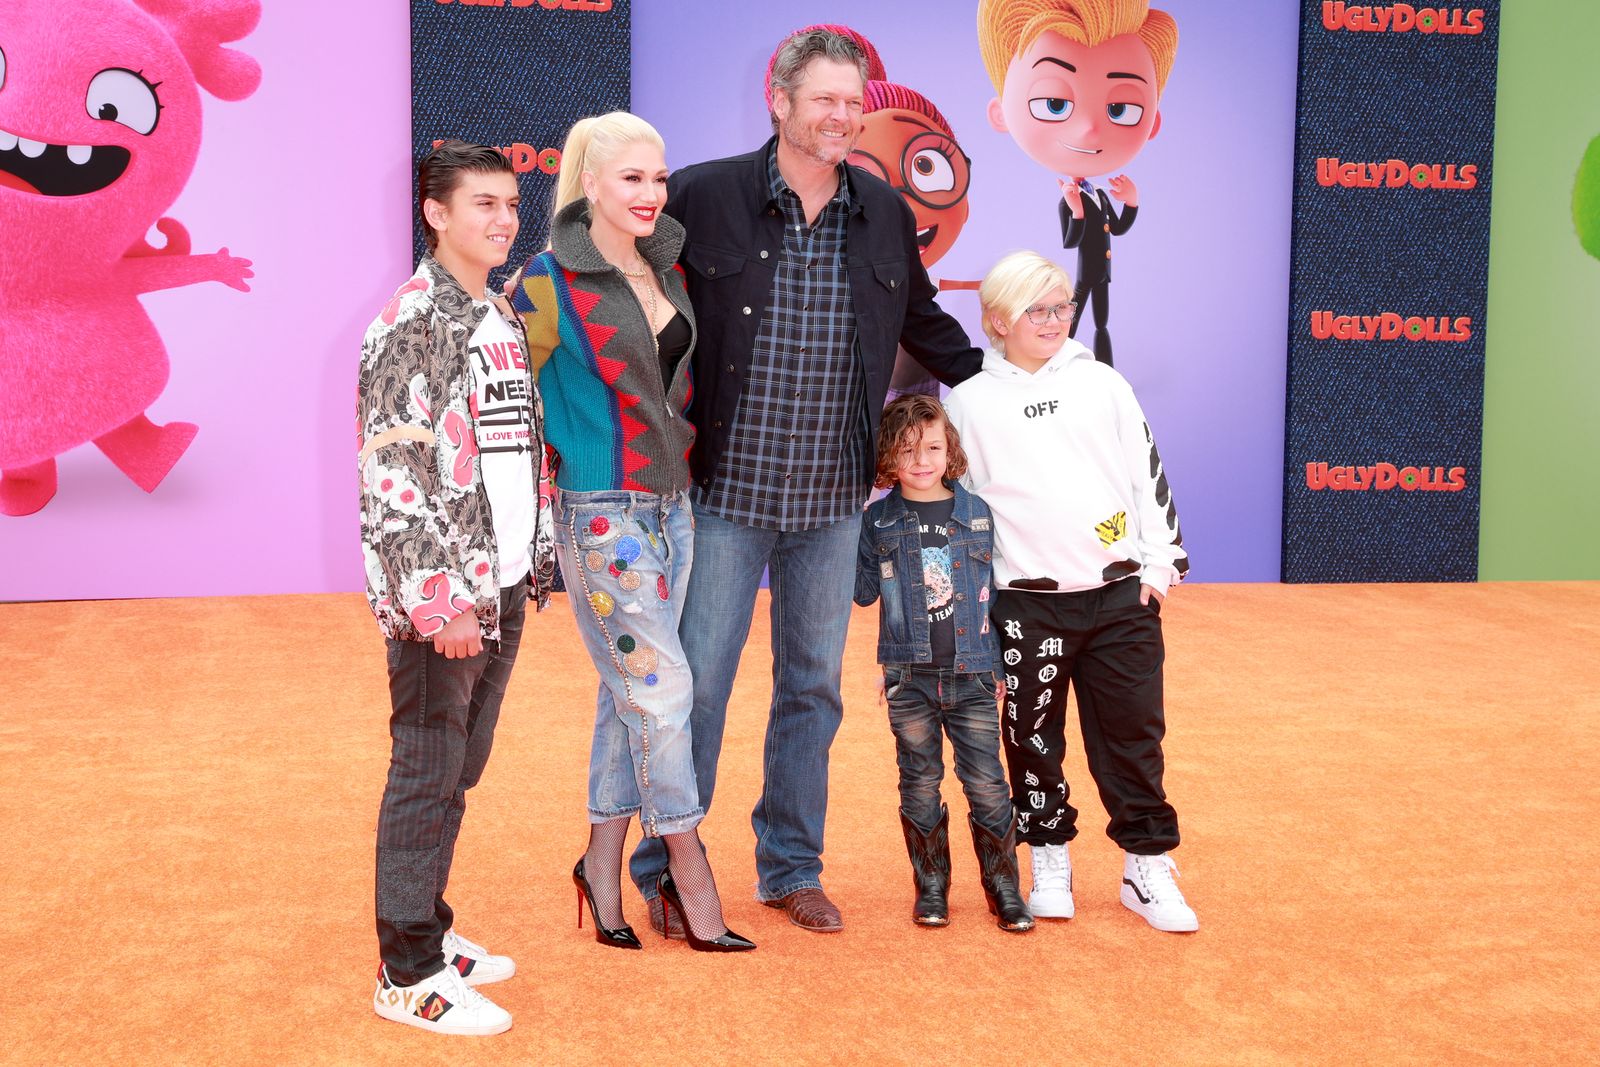 Kingston Rossdale, Gwen Stefani, Blake Shelton, Apollo Bowie Flynn Rossdale, and Zuma Nesta Rock Rossdale at the World Premiere of "UglyDolls" on April 27, 2019, in Los Angeles, California. | Photo: Getty Images